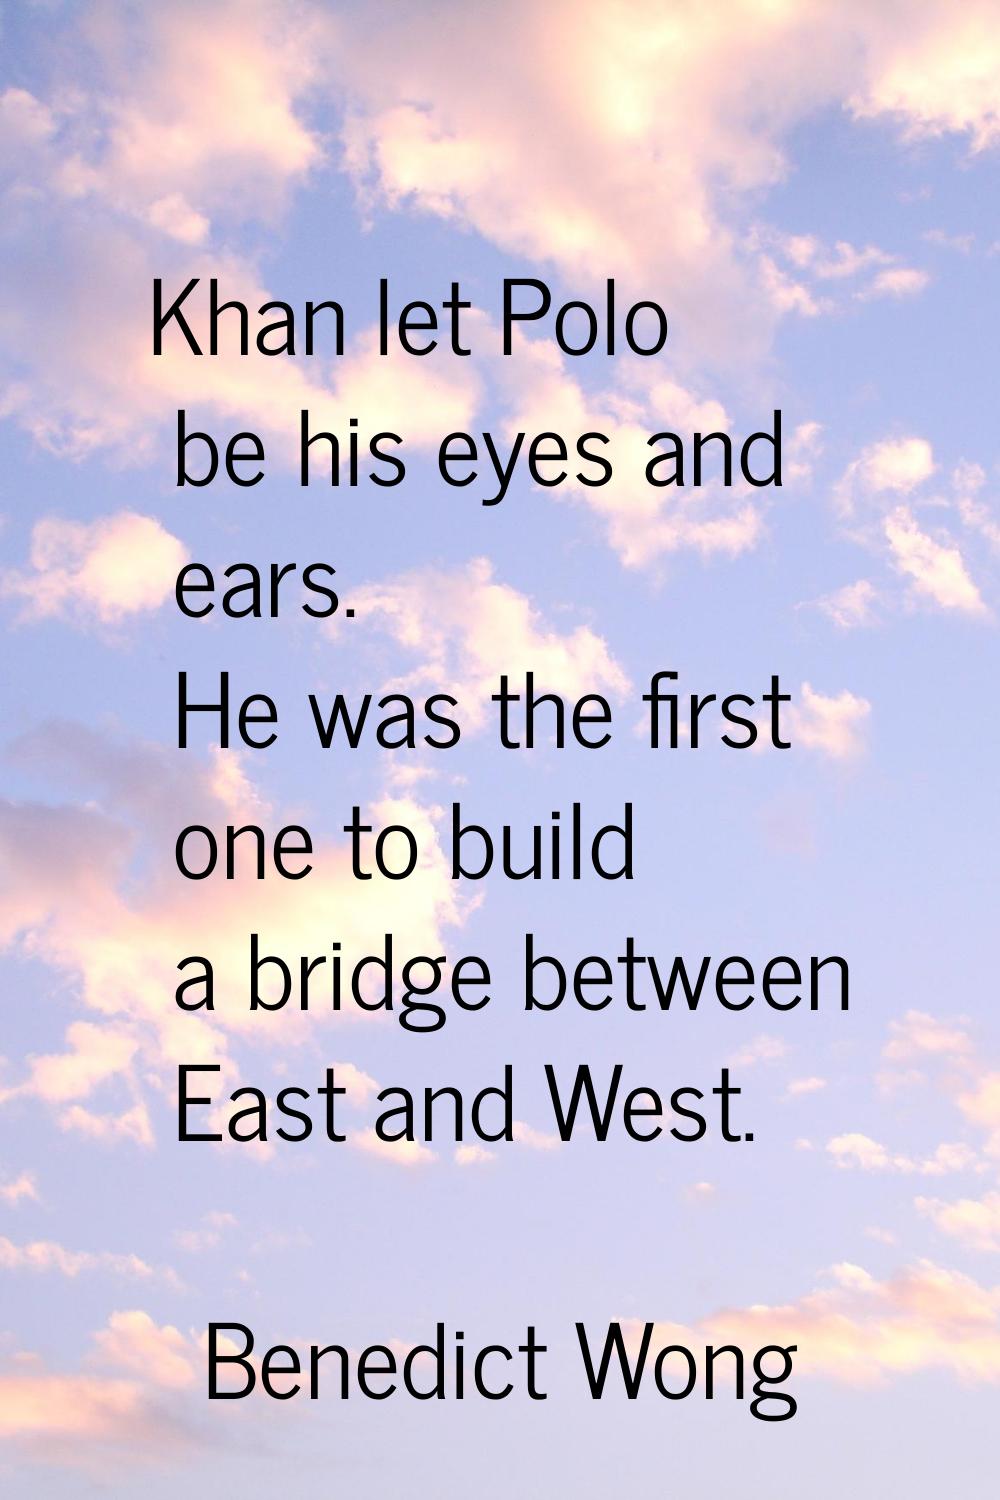 Khan let Polo be his eyes and ears. He was the first one to build a bridge between East and West.